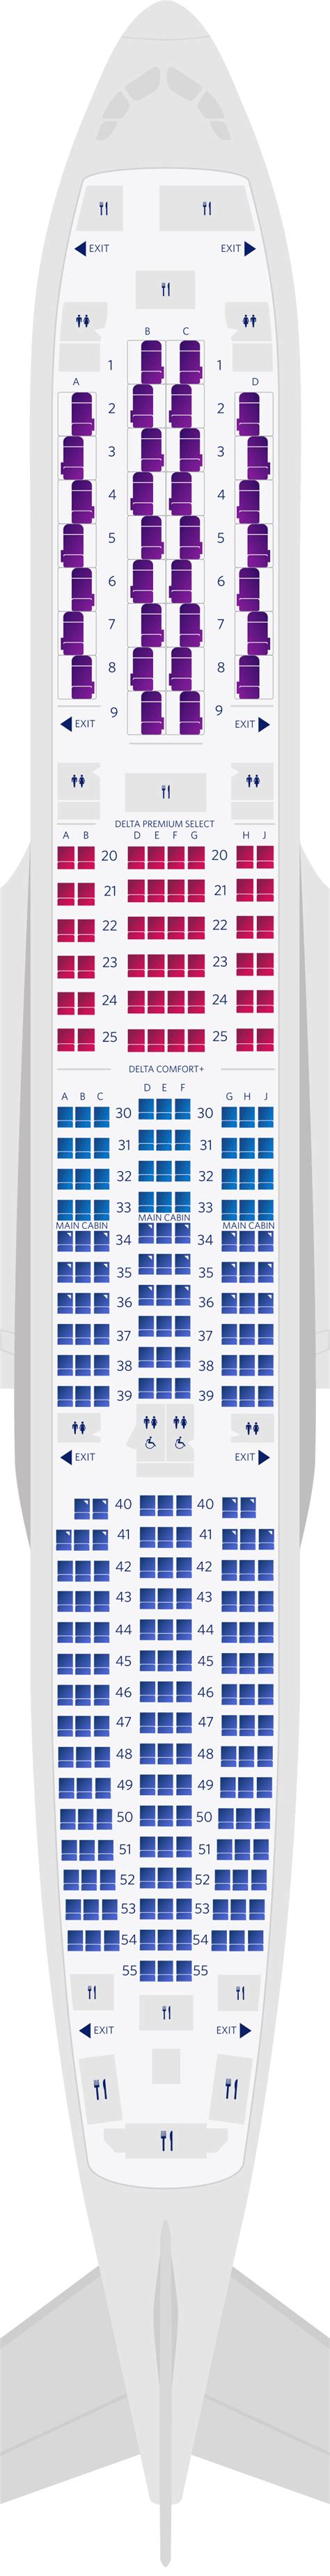 Delta Airbus Seating Chart Hot Sex Picture